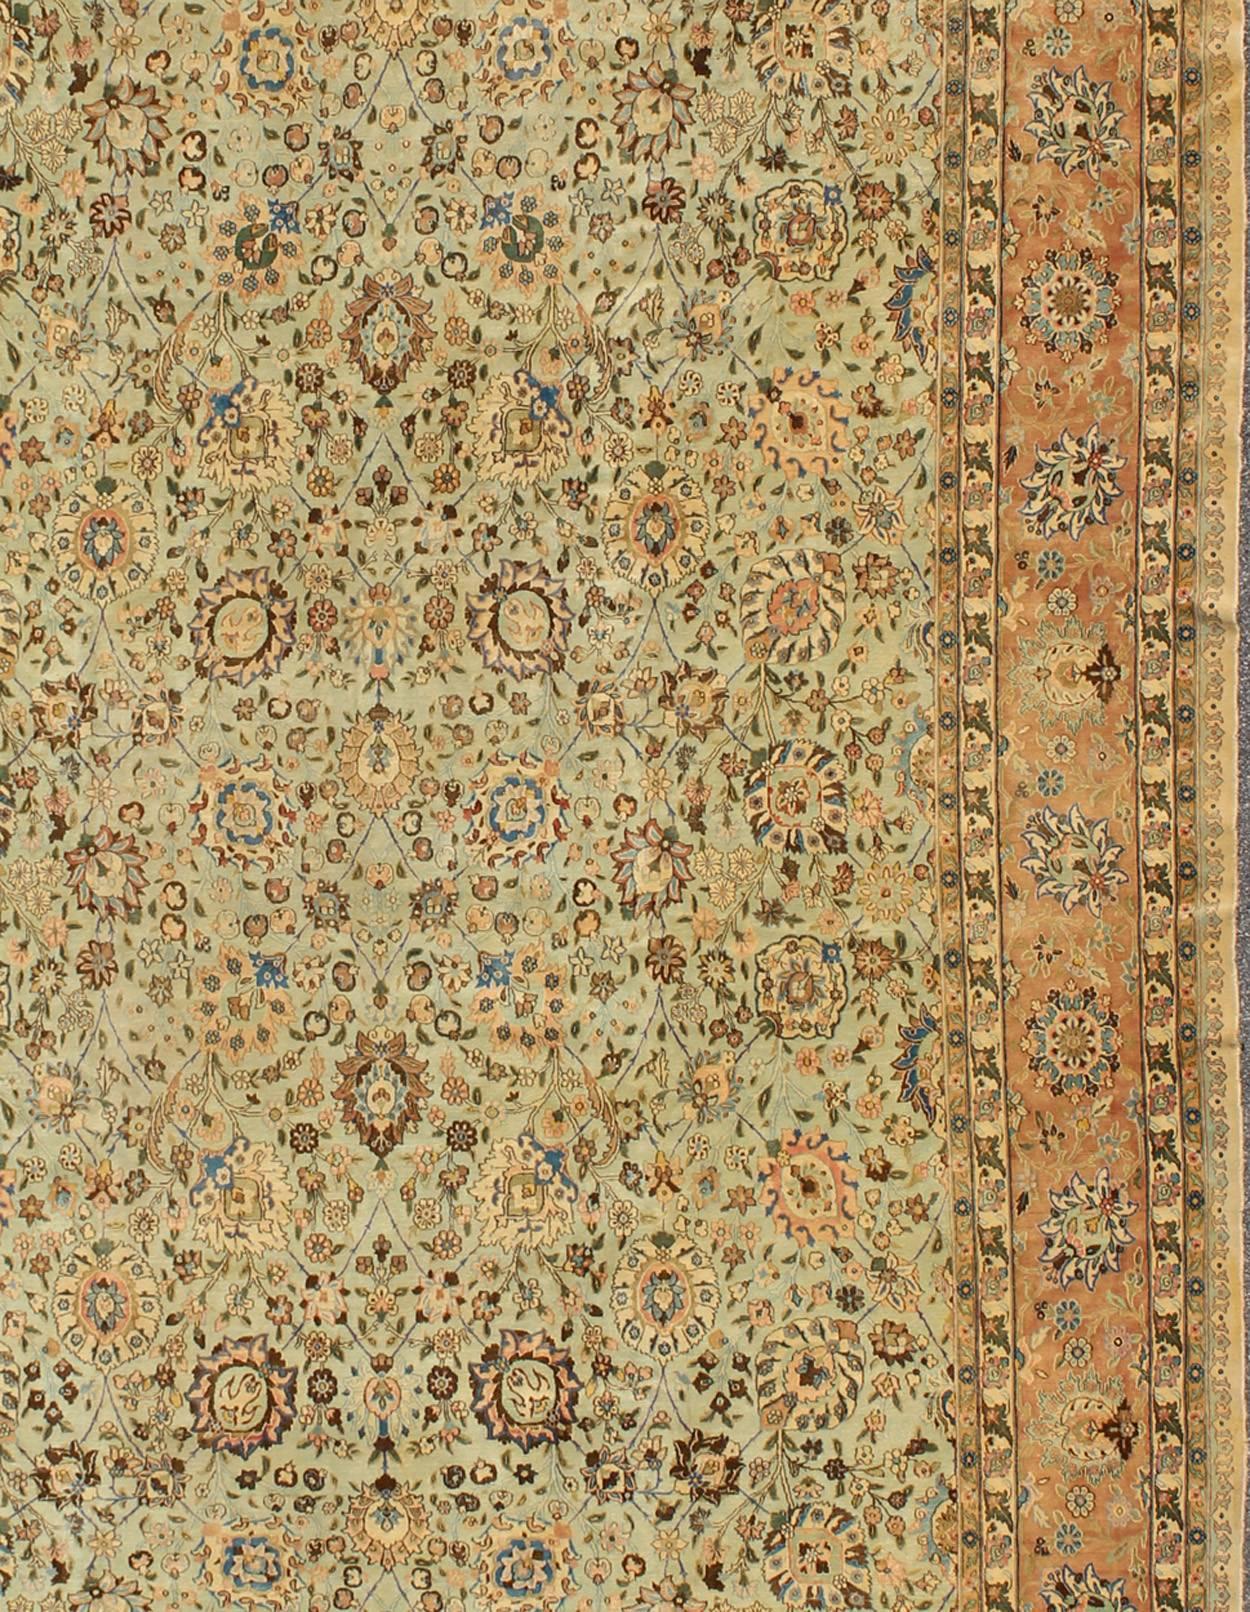 Hand-Knotted Vintage Persian Tabriz Rug, Intricate Floral Design in Light Green and Salmon